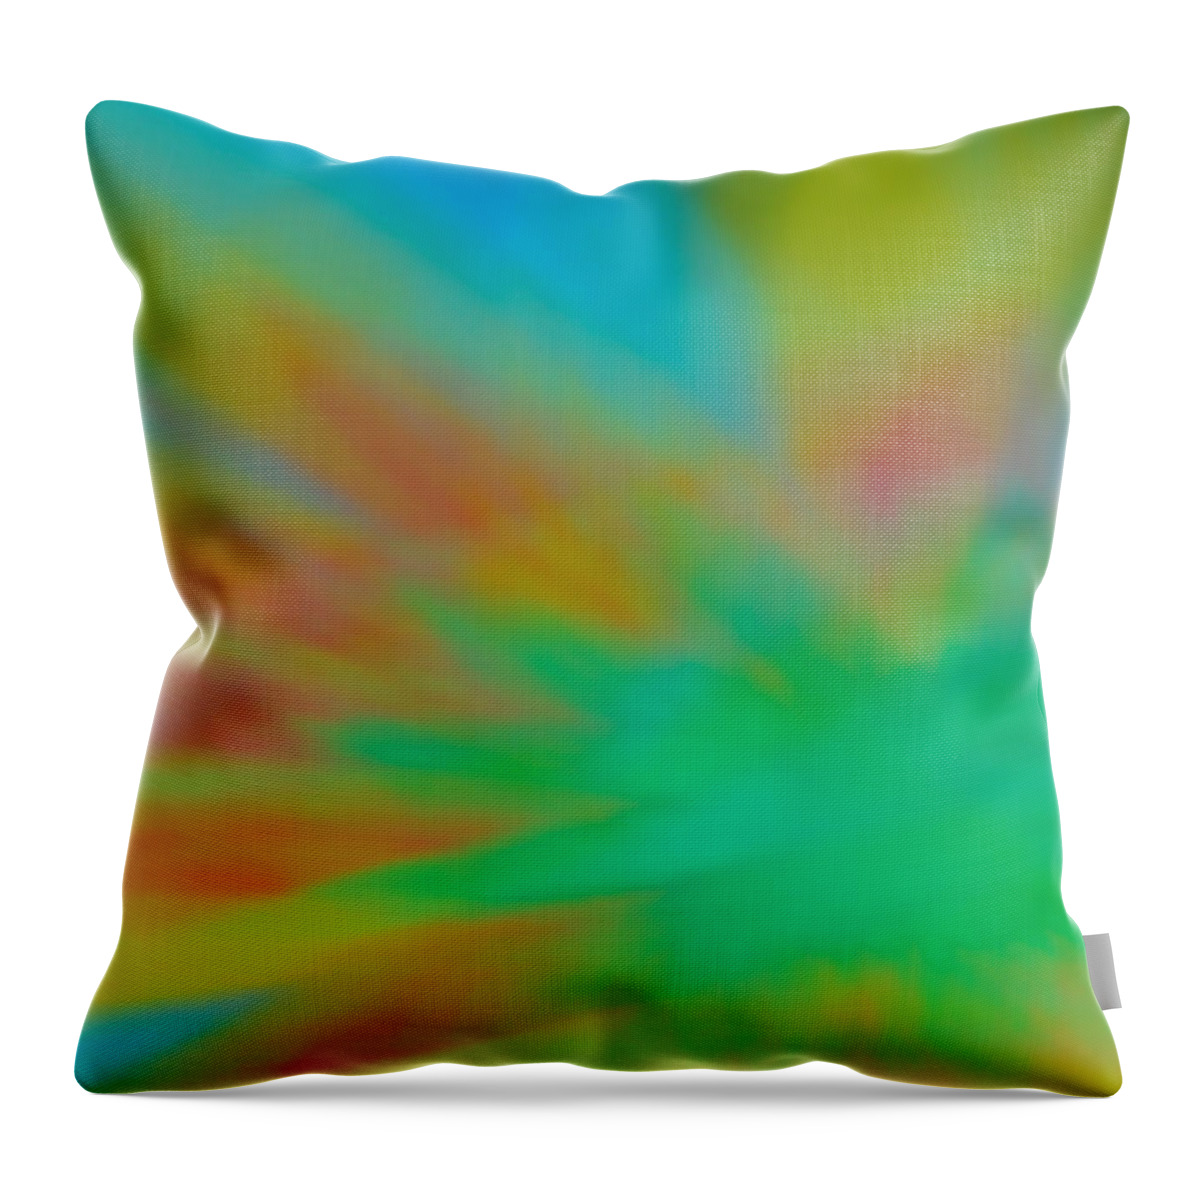 Photograph Throw Pillow featuring the photograph Tie Dye Abstract by Larah McElroy